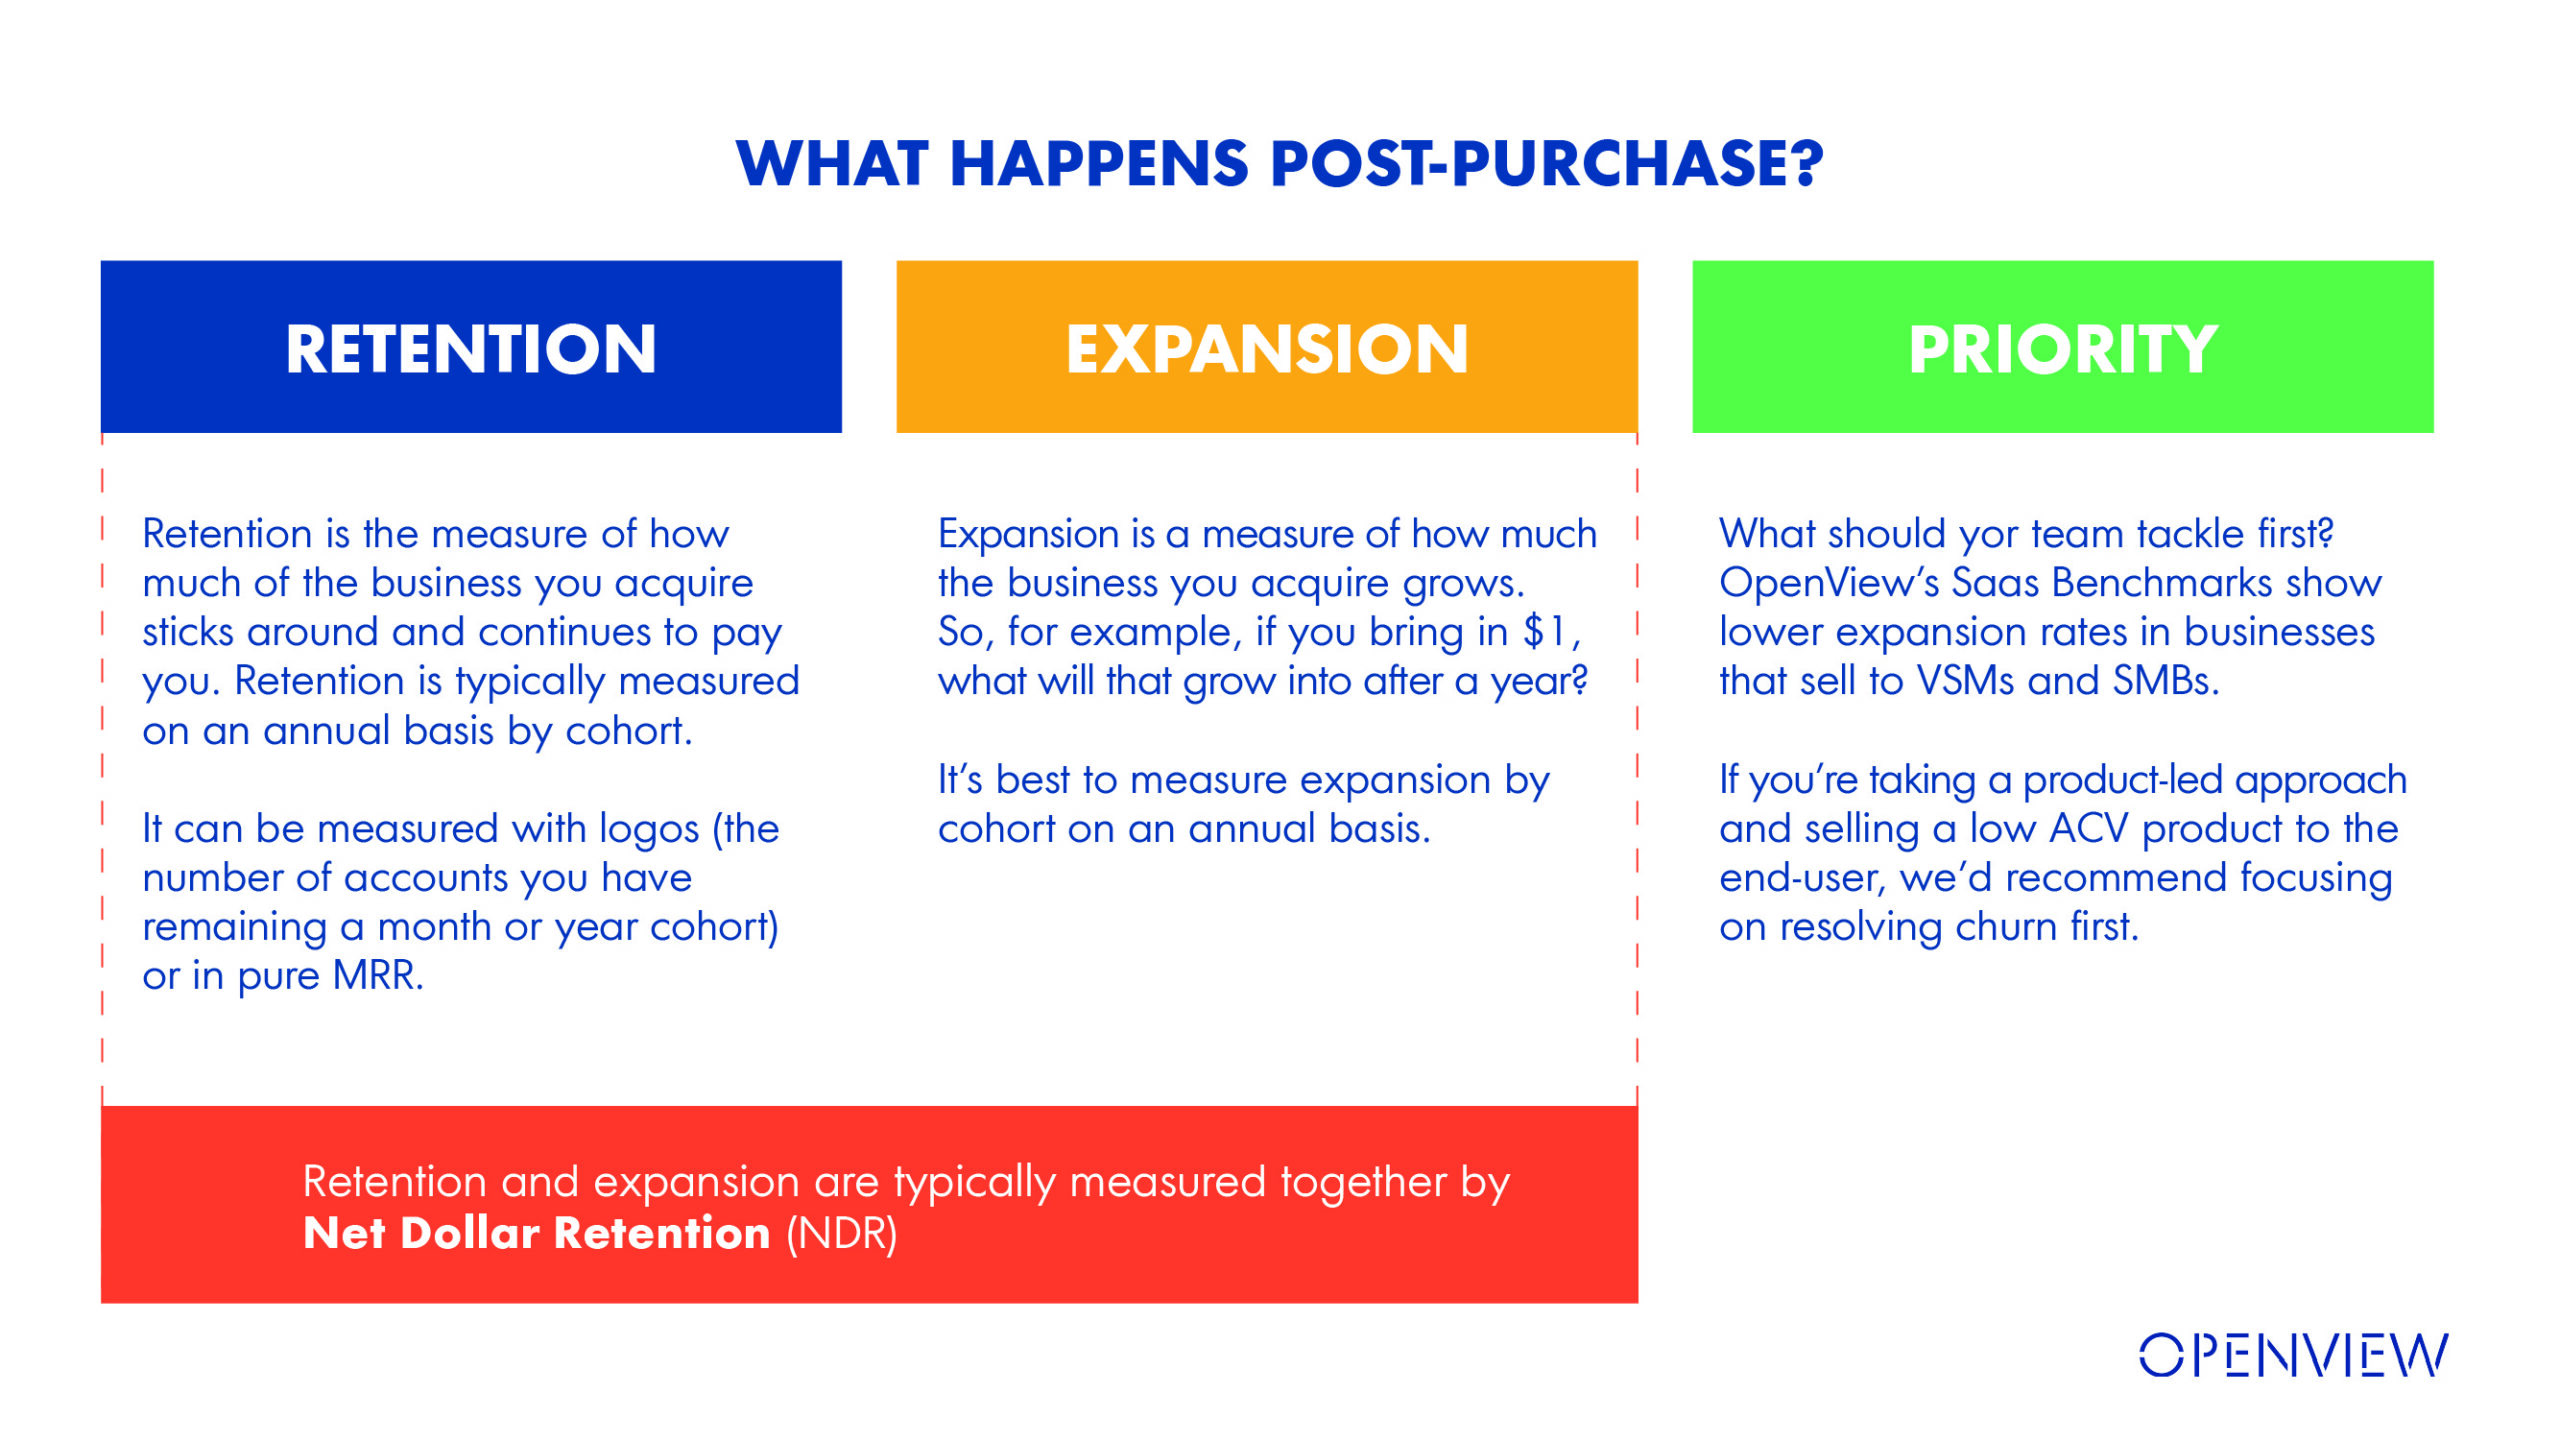 OpenView's Post-Purchase Graphic